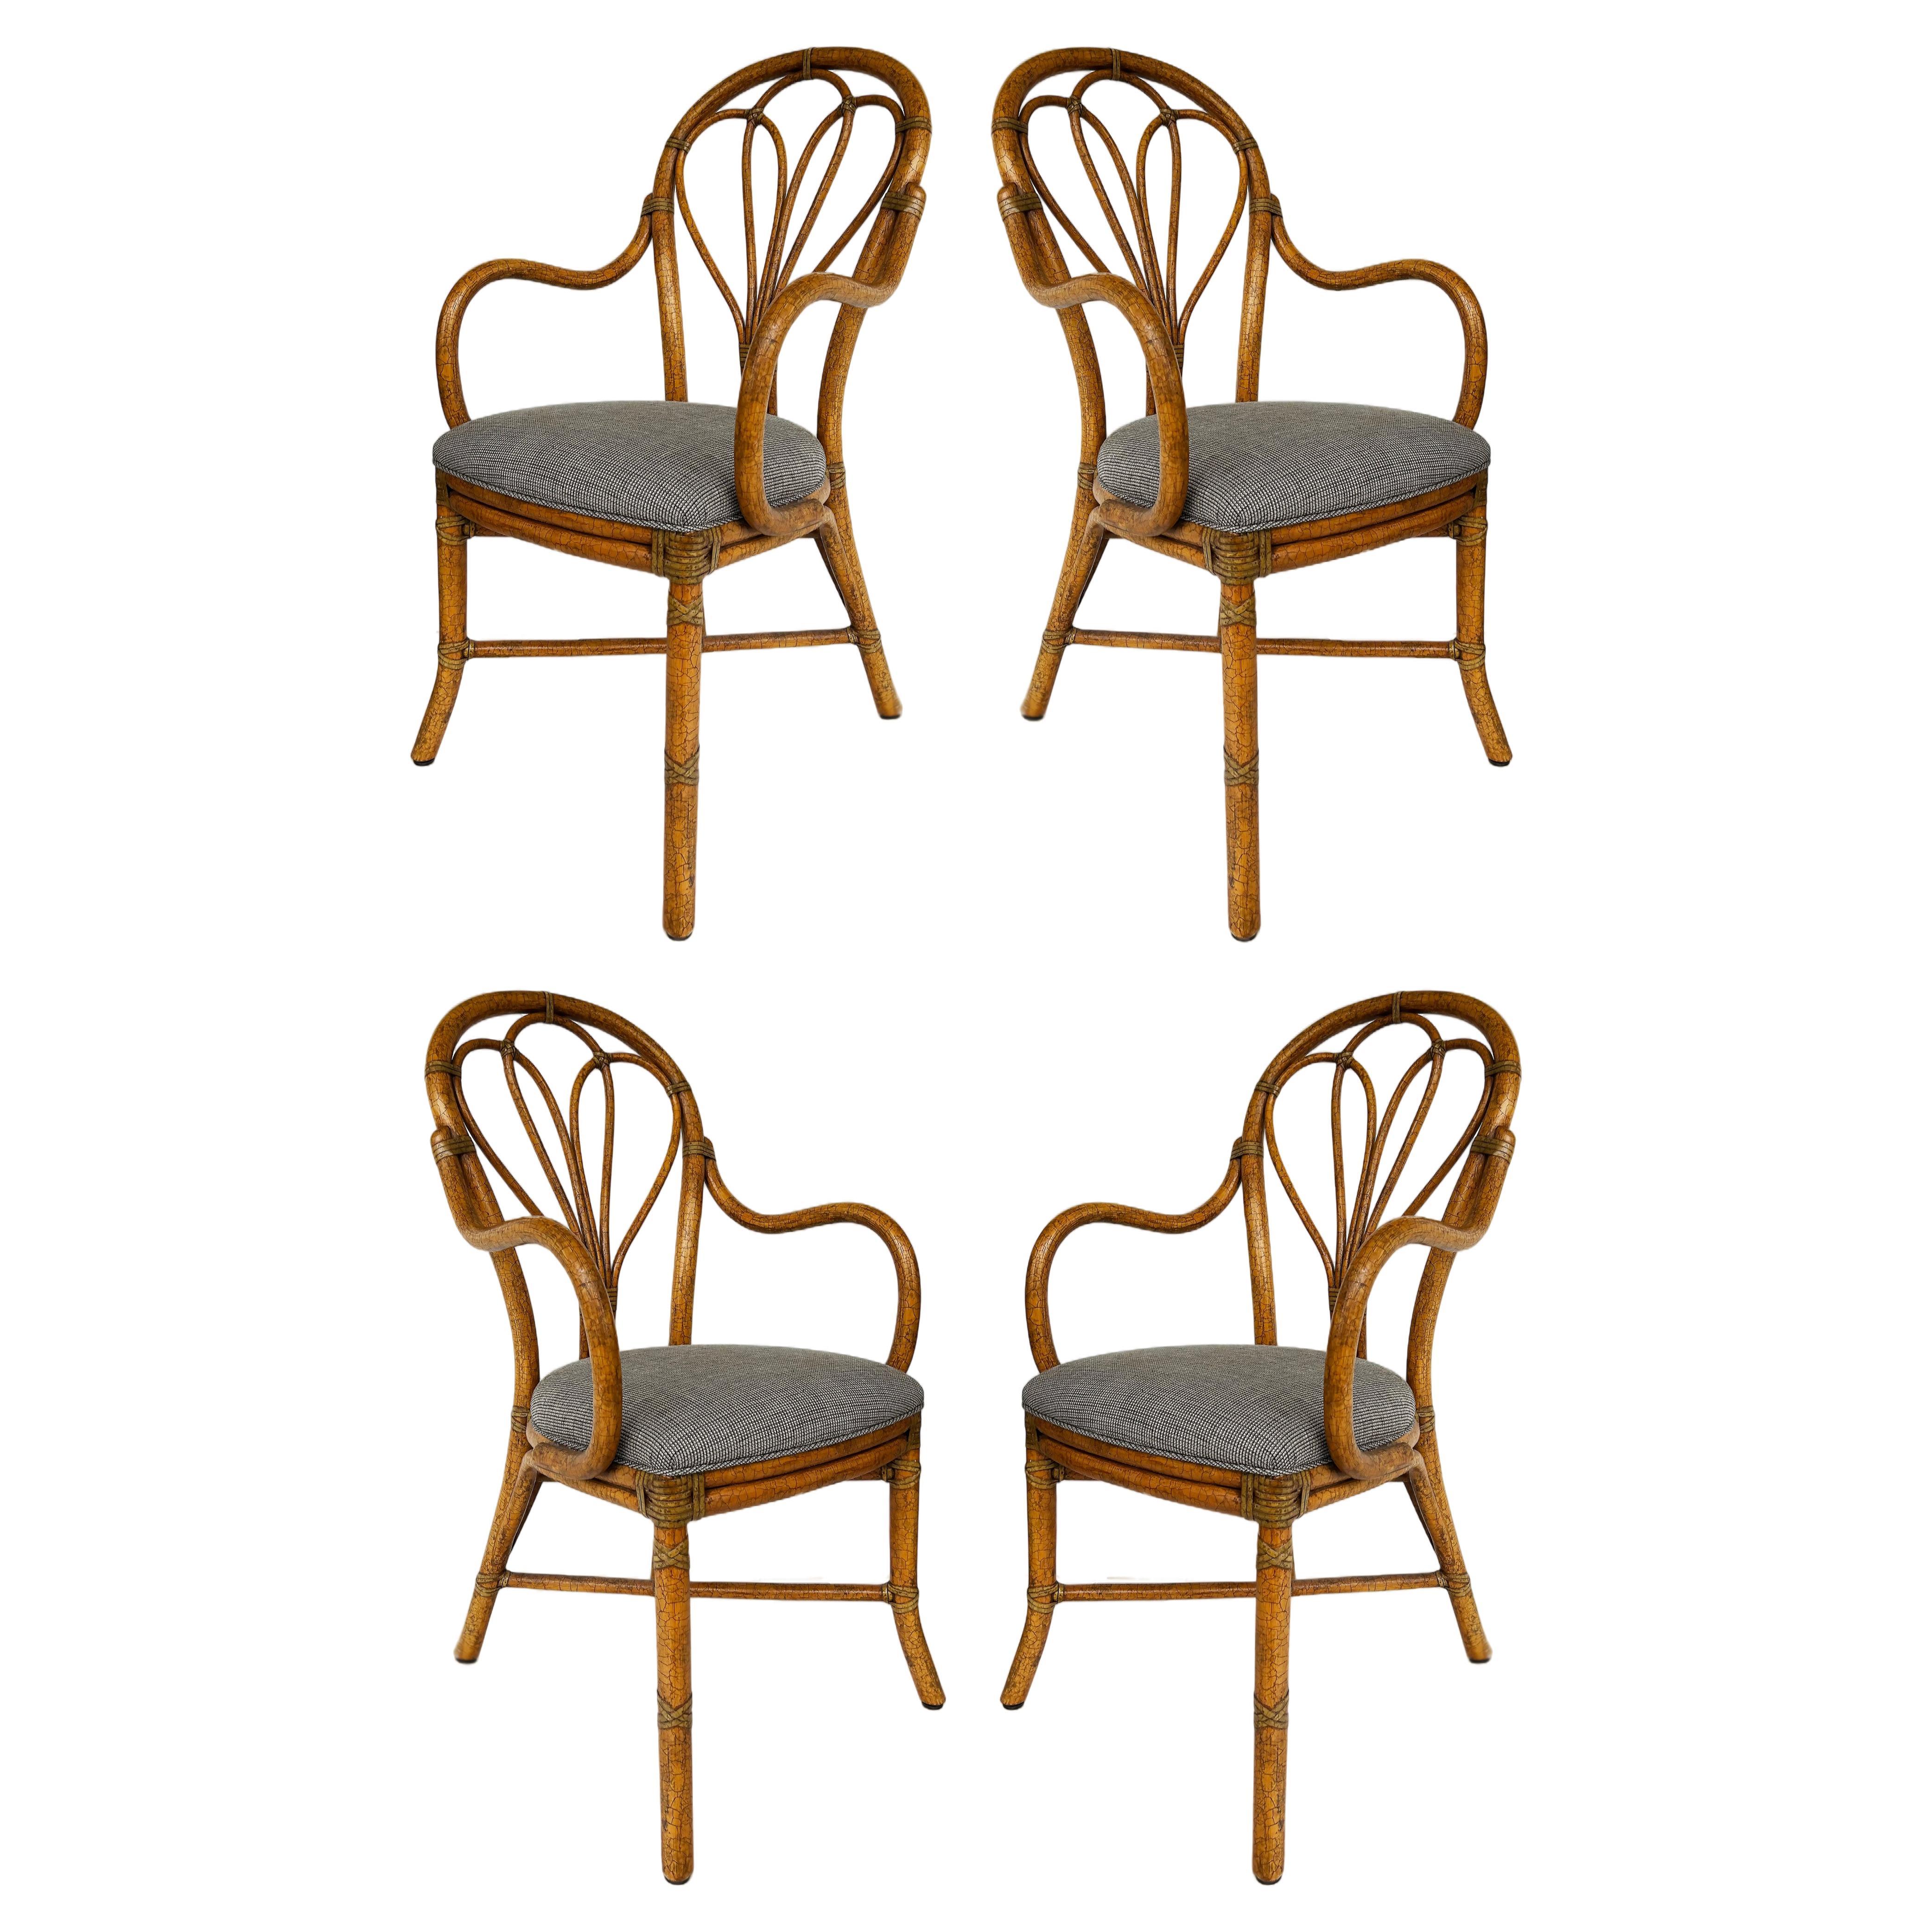 McGuire San Francisco Set of 4 Upholstered Rattan Armchairs with Rawhide